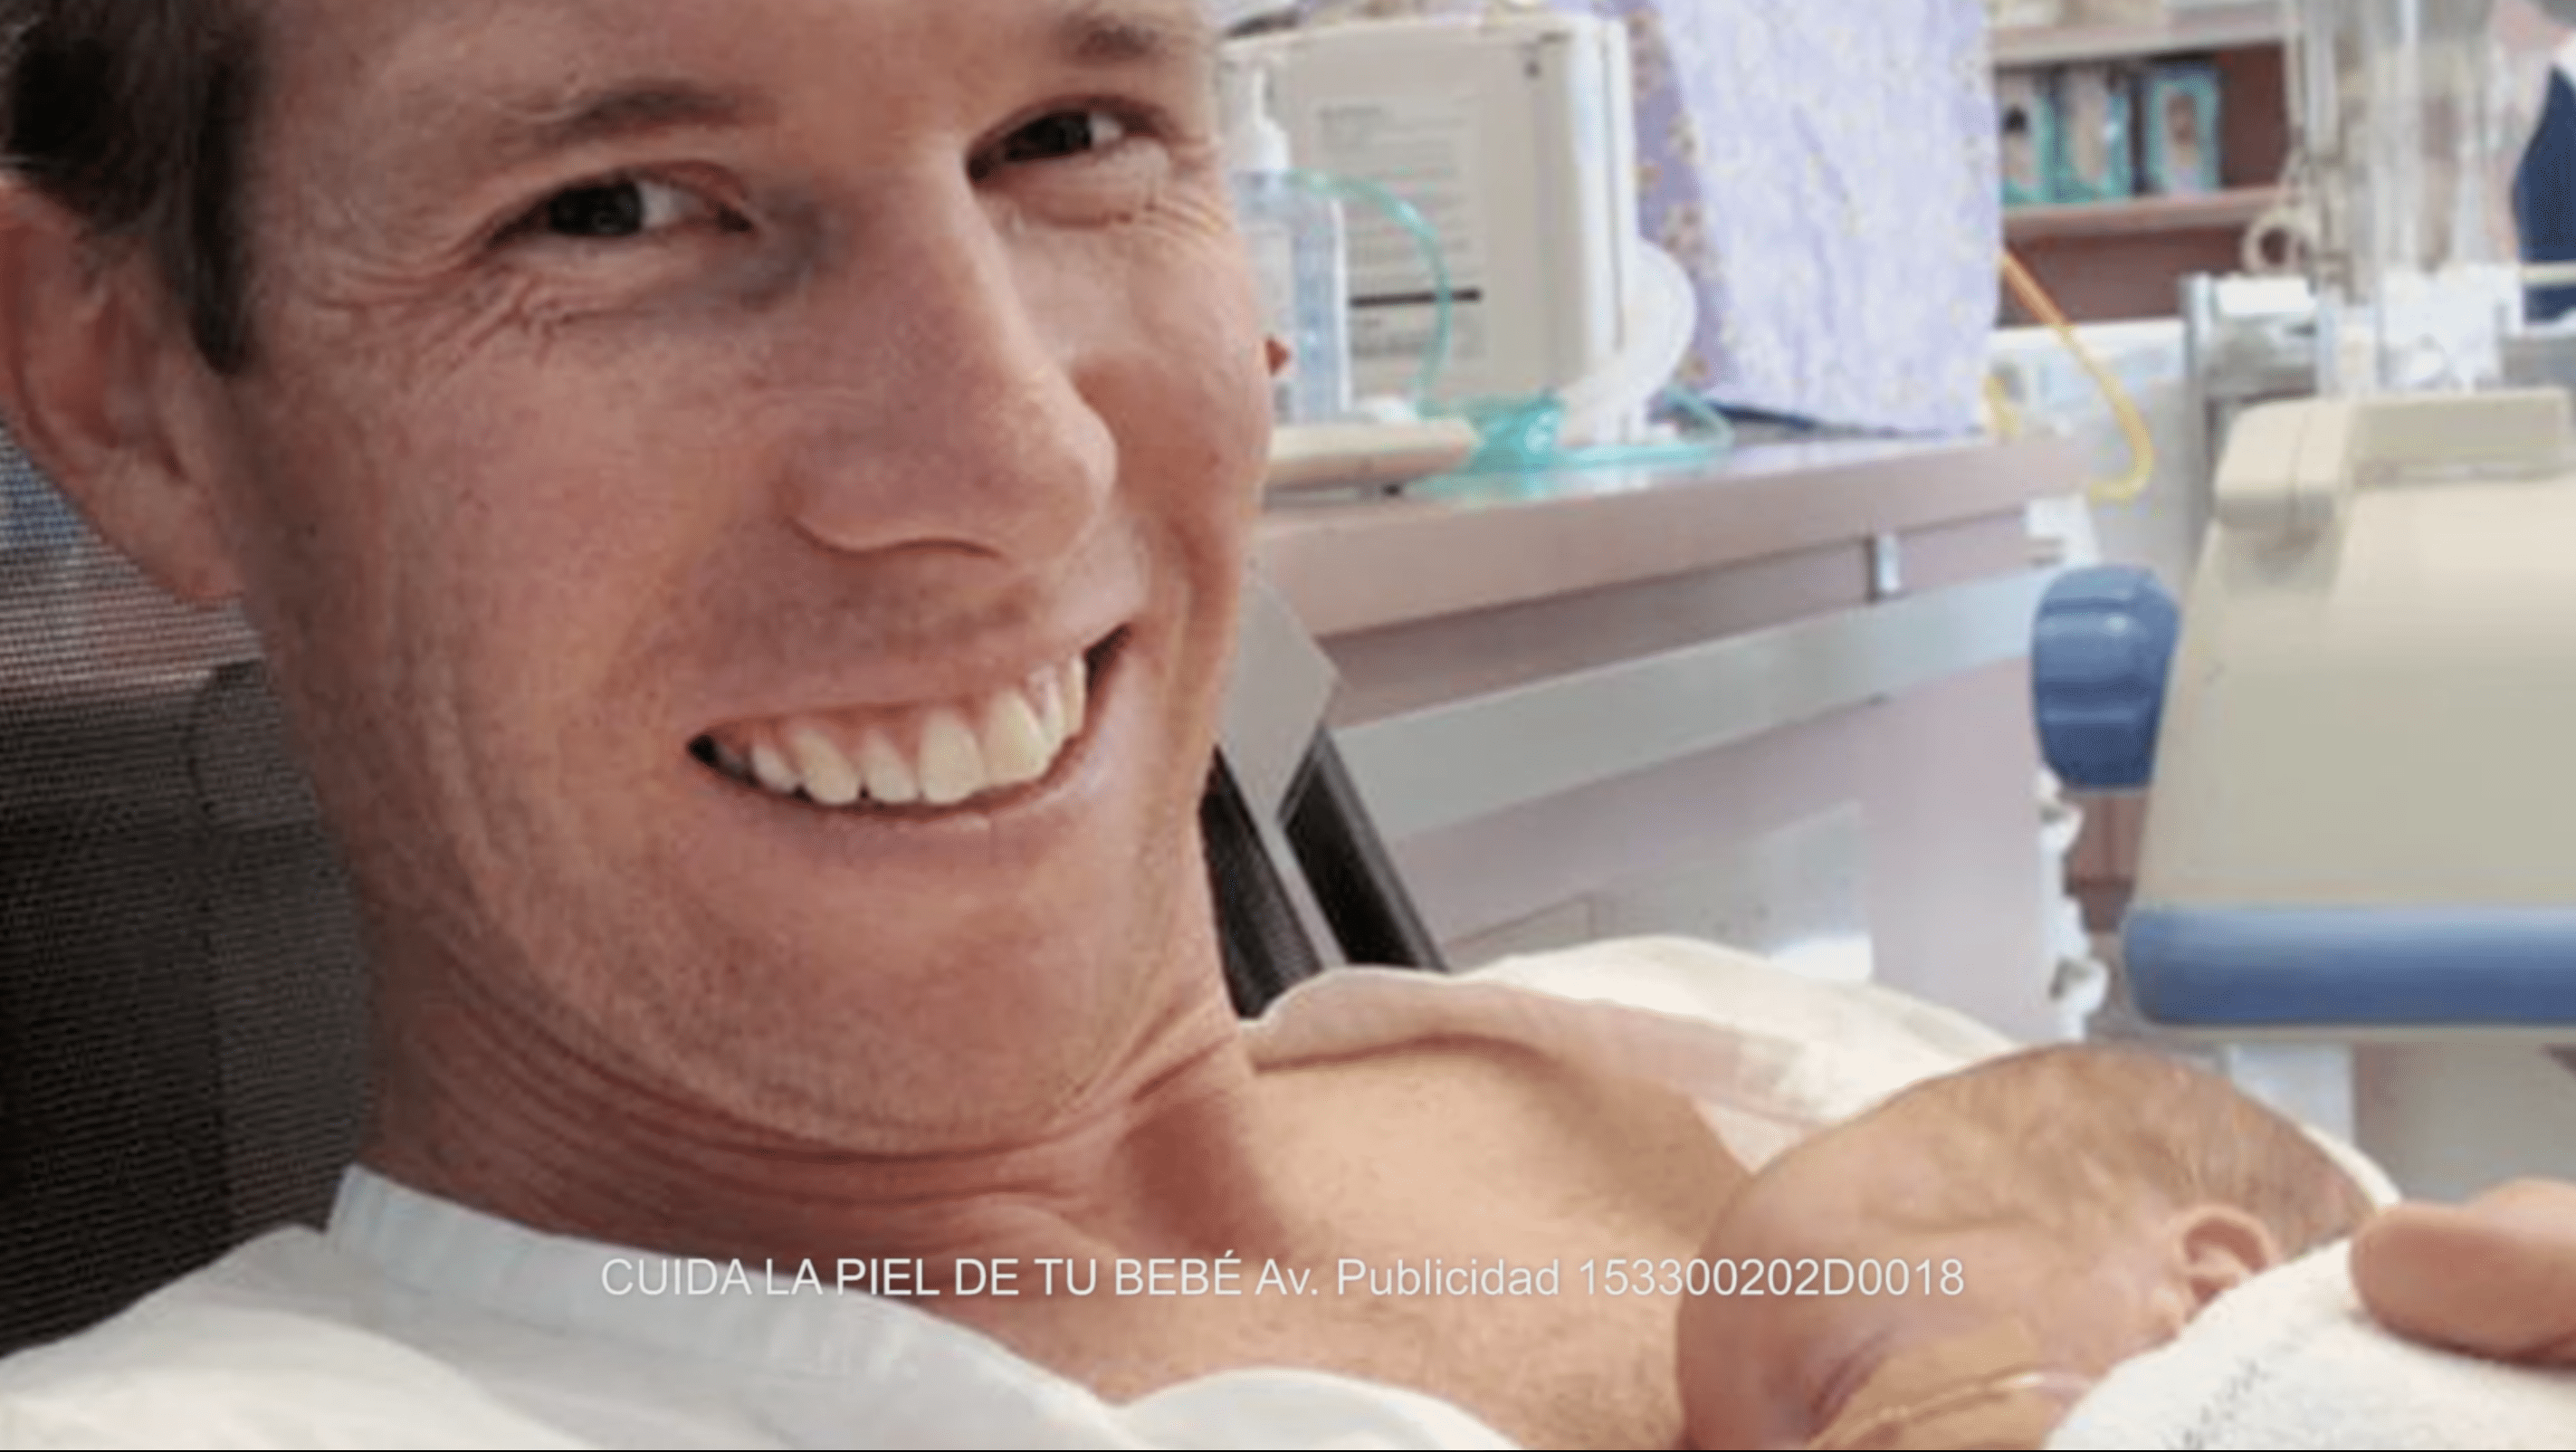 David Ogg pictured with his twin boy Jamie in the hospital. | Photo: YouTube.com/J&J - Mexico y Centroamerica